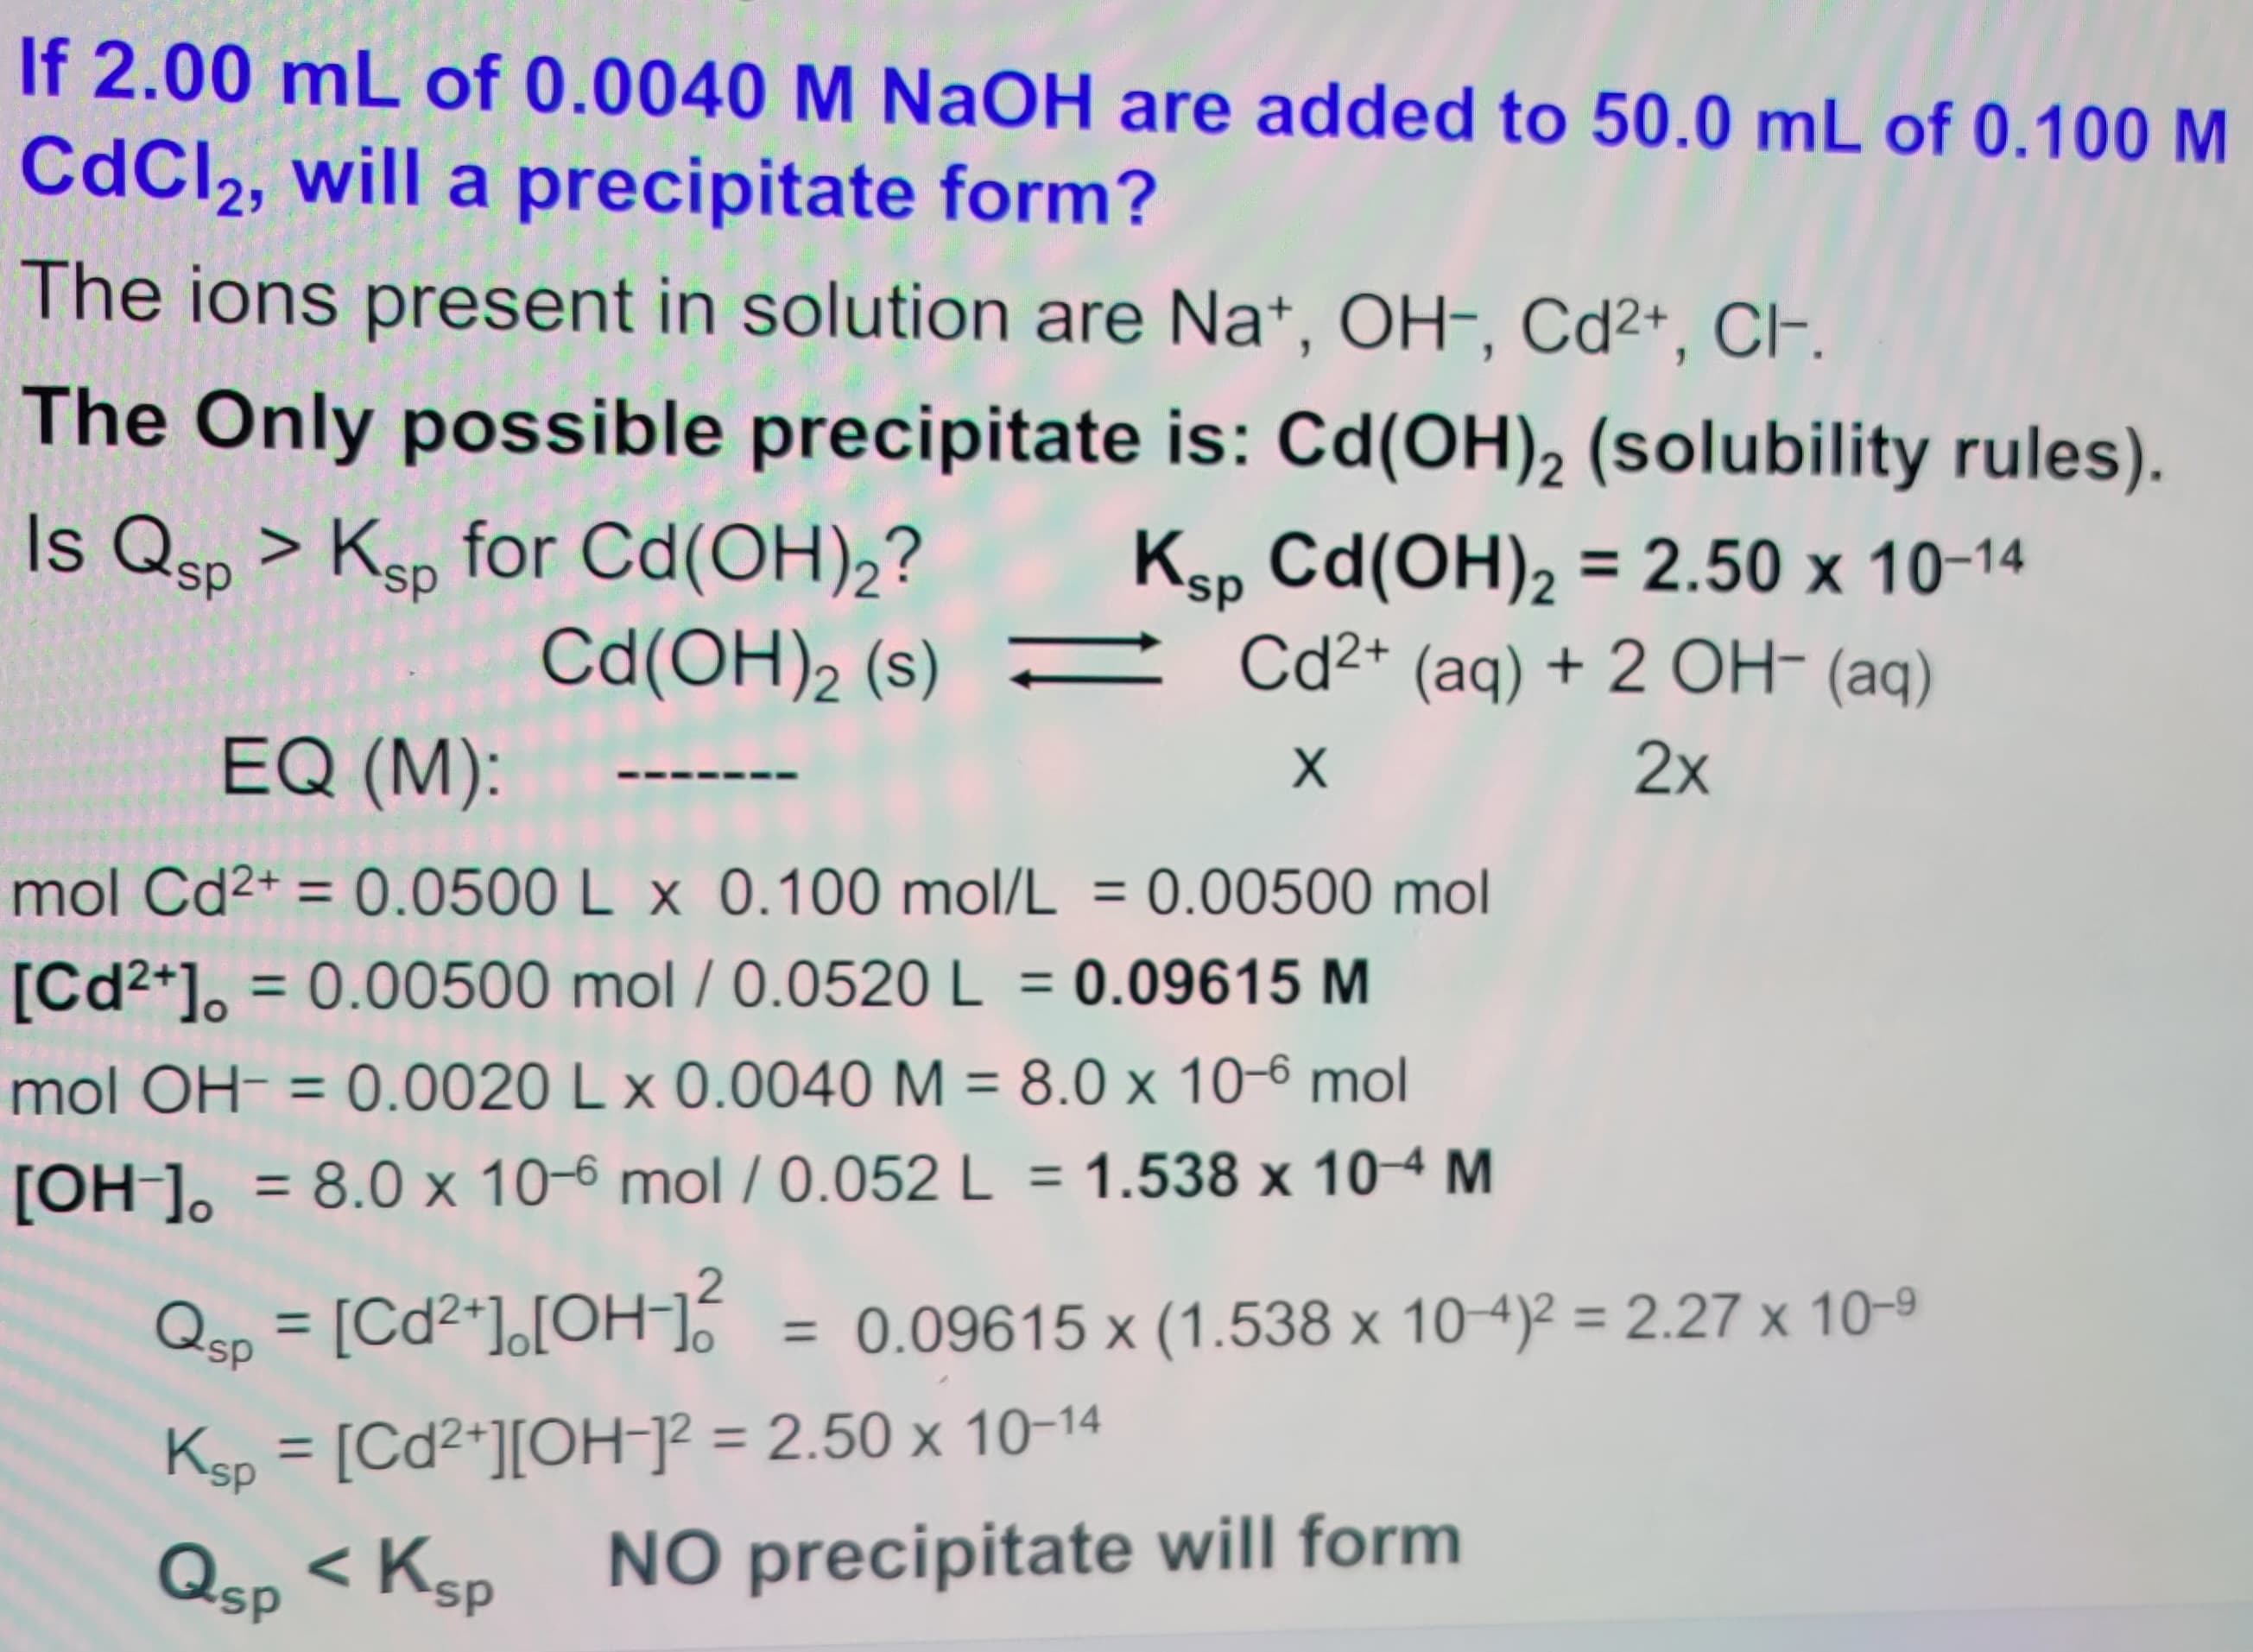 If 2.00 mL of 0.0040 M NaOH are added to 50.0 mL of 0.100 M
CdCl2, will a precipitate form?
The ions present in solution are Na+, OH-, Cd 2+, CH-.
The Only possible precipitate is: Cd(OH)2 (solubility rules).
Is Qsp > Ksp for Cd(OH)2?
Cd(OH) 2 (s)
Ksp Cd(OH)2 = 2.50 x 10-14
EQ (M):
Cd2+ (aq) + 2 OH- (aq)
X
mol Cd 2+ = 0.0500 L x 0.100 mol/L = 0.00500 mol
[Cd2+] = 0.00500 mol/0.0520 L = 0.09615 M
mol OH = 0.0020 L x 0.0040 M = 8.0 x 10-6 mol
[OH-] 8.0 x 10-6 mol/0.052 L = 1.538 x 10-4 M
=
Qsp = [Cd 2+ ] [OH-] 2
2x
= 0.09615 x (1.538 x 10-4)² = 2.27 x 10-9
NO precipitate will form
Ksp = [Cd2+] [OH-]² = 2.50 x 10-14
Qsp < Ks
sp